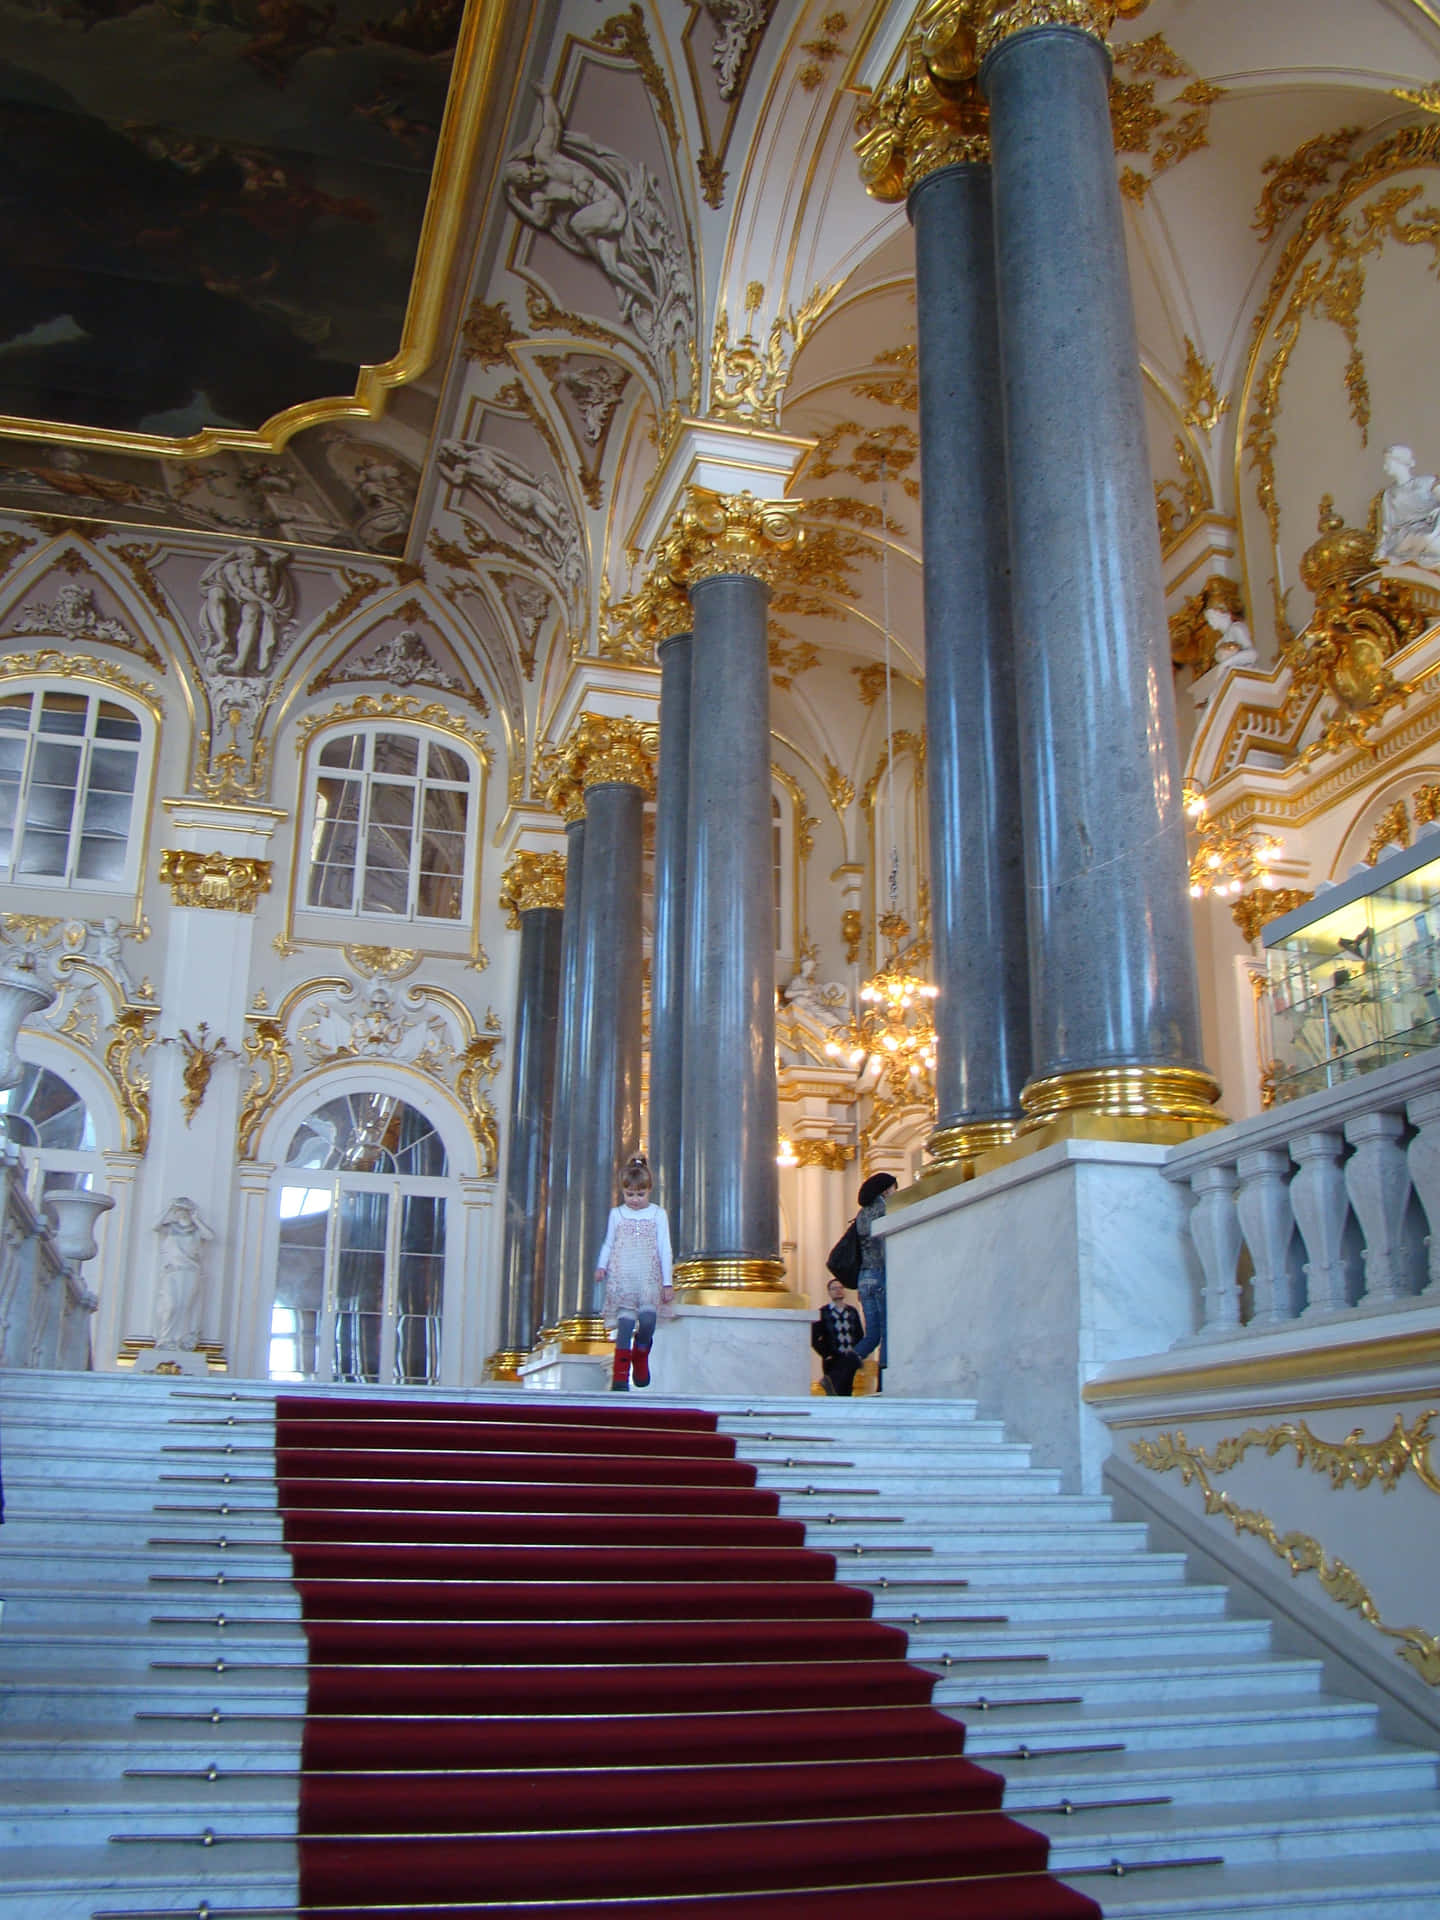 "Magnificent Winter Palace, The Hermitage in St. Petersburg" Wallpaper